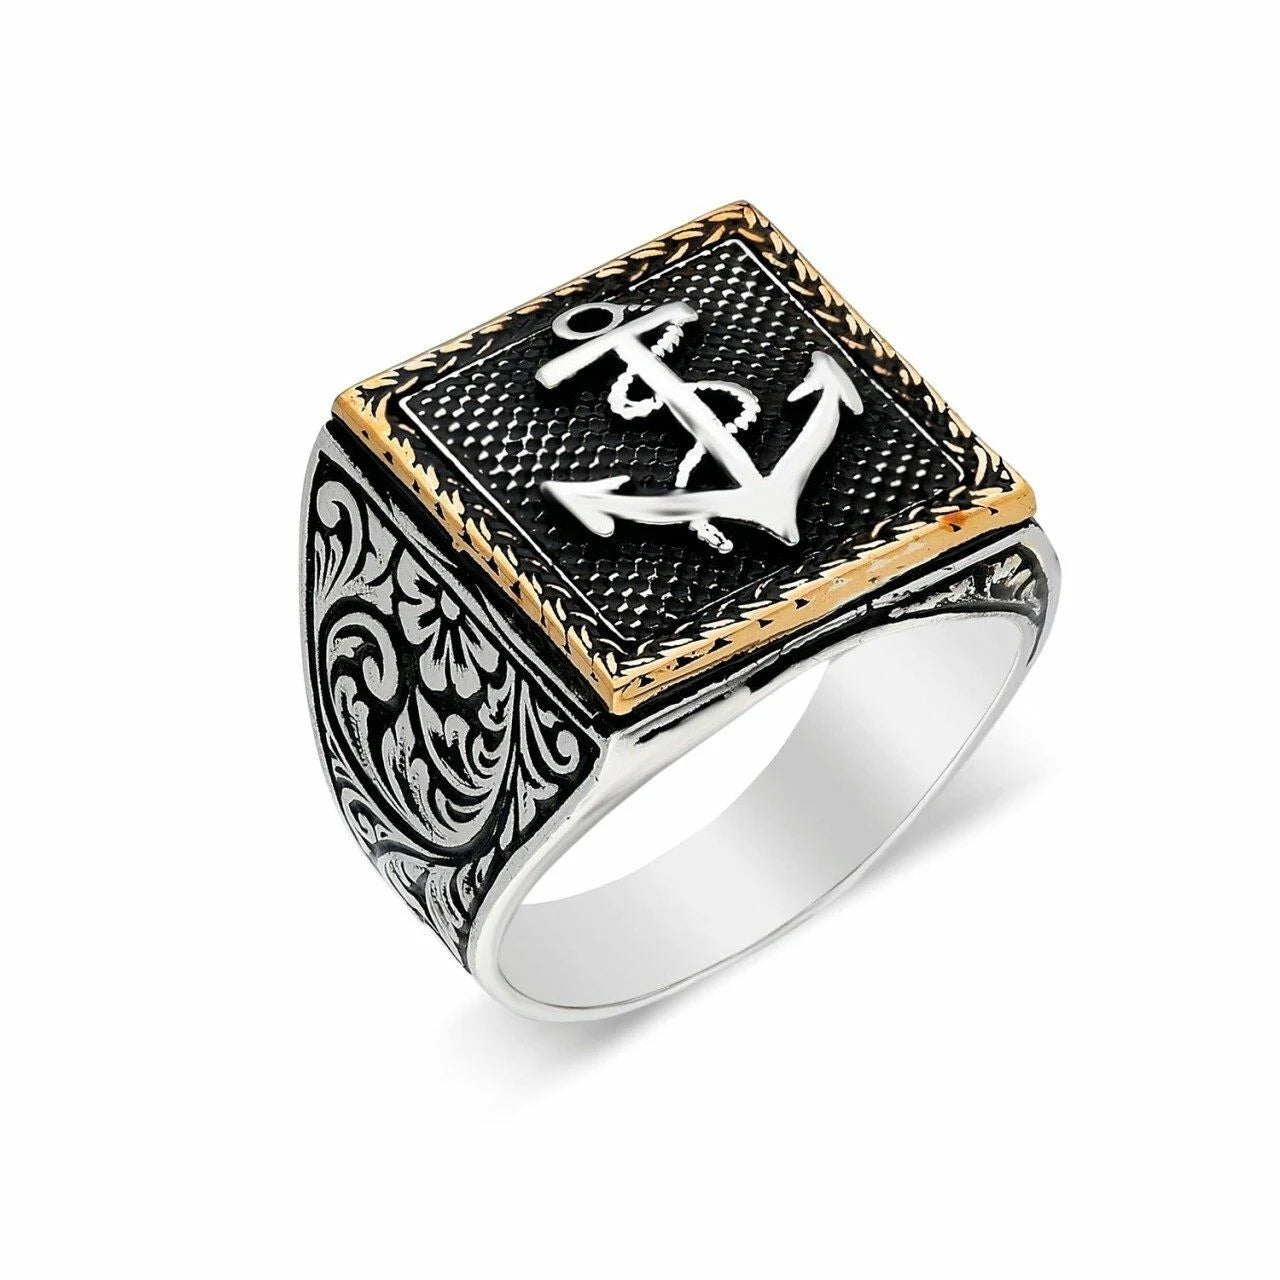 Anchor Ring - Silver Sides Design 925 | OrlaSilver with Engraved Square Maritime